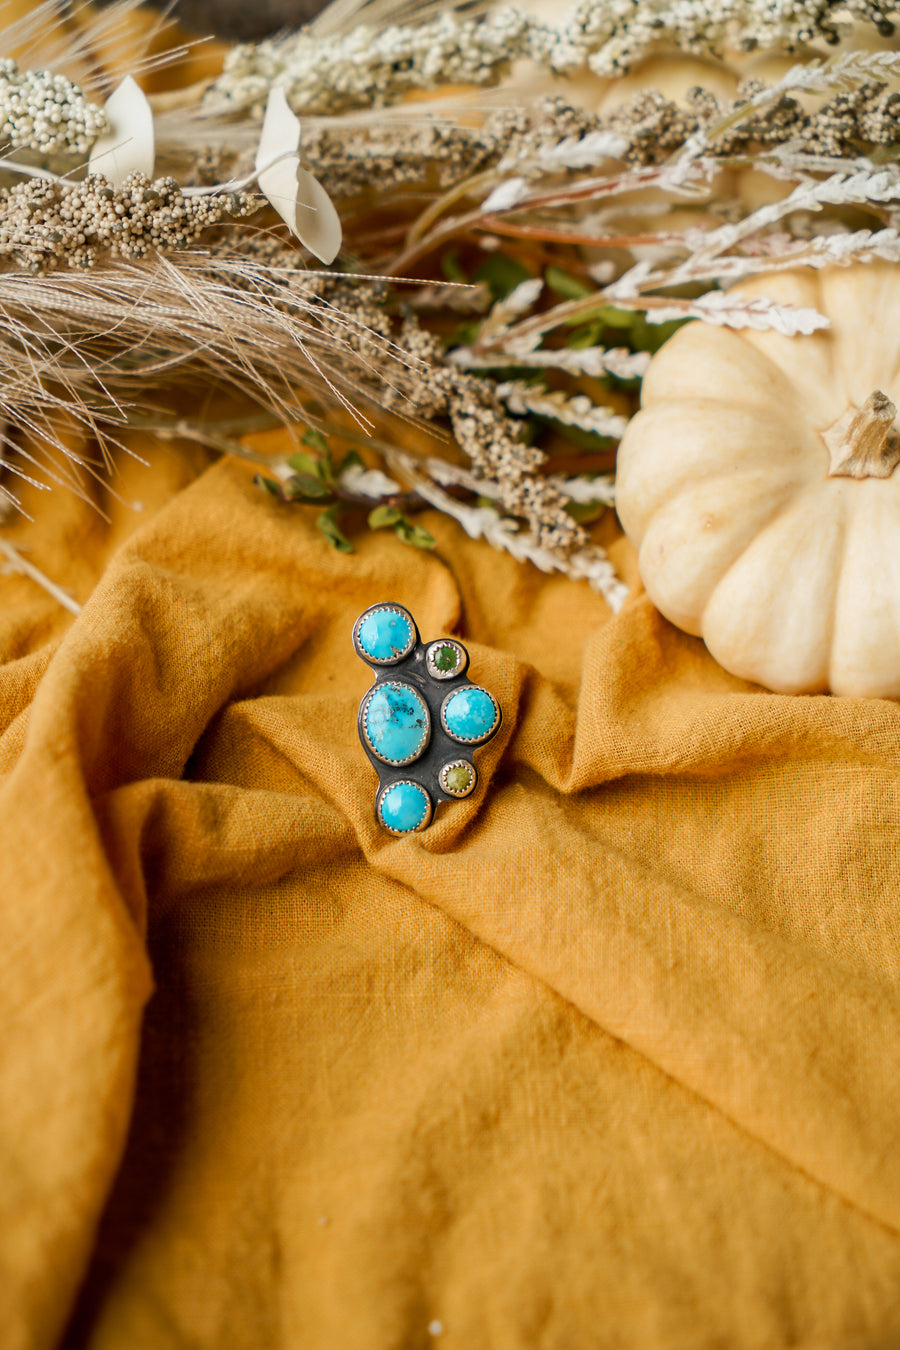 Radial Ring in Blue Ridge and Sonoran Gold Turquoise Ring (Size 6)